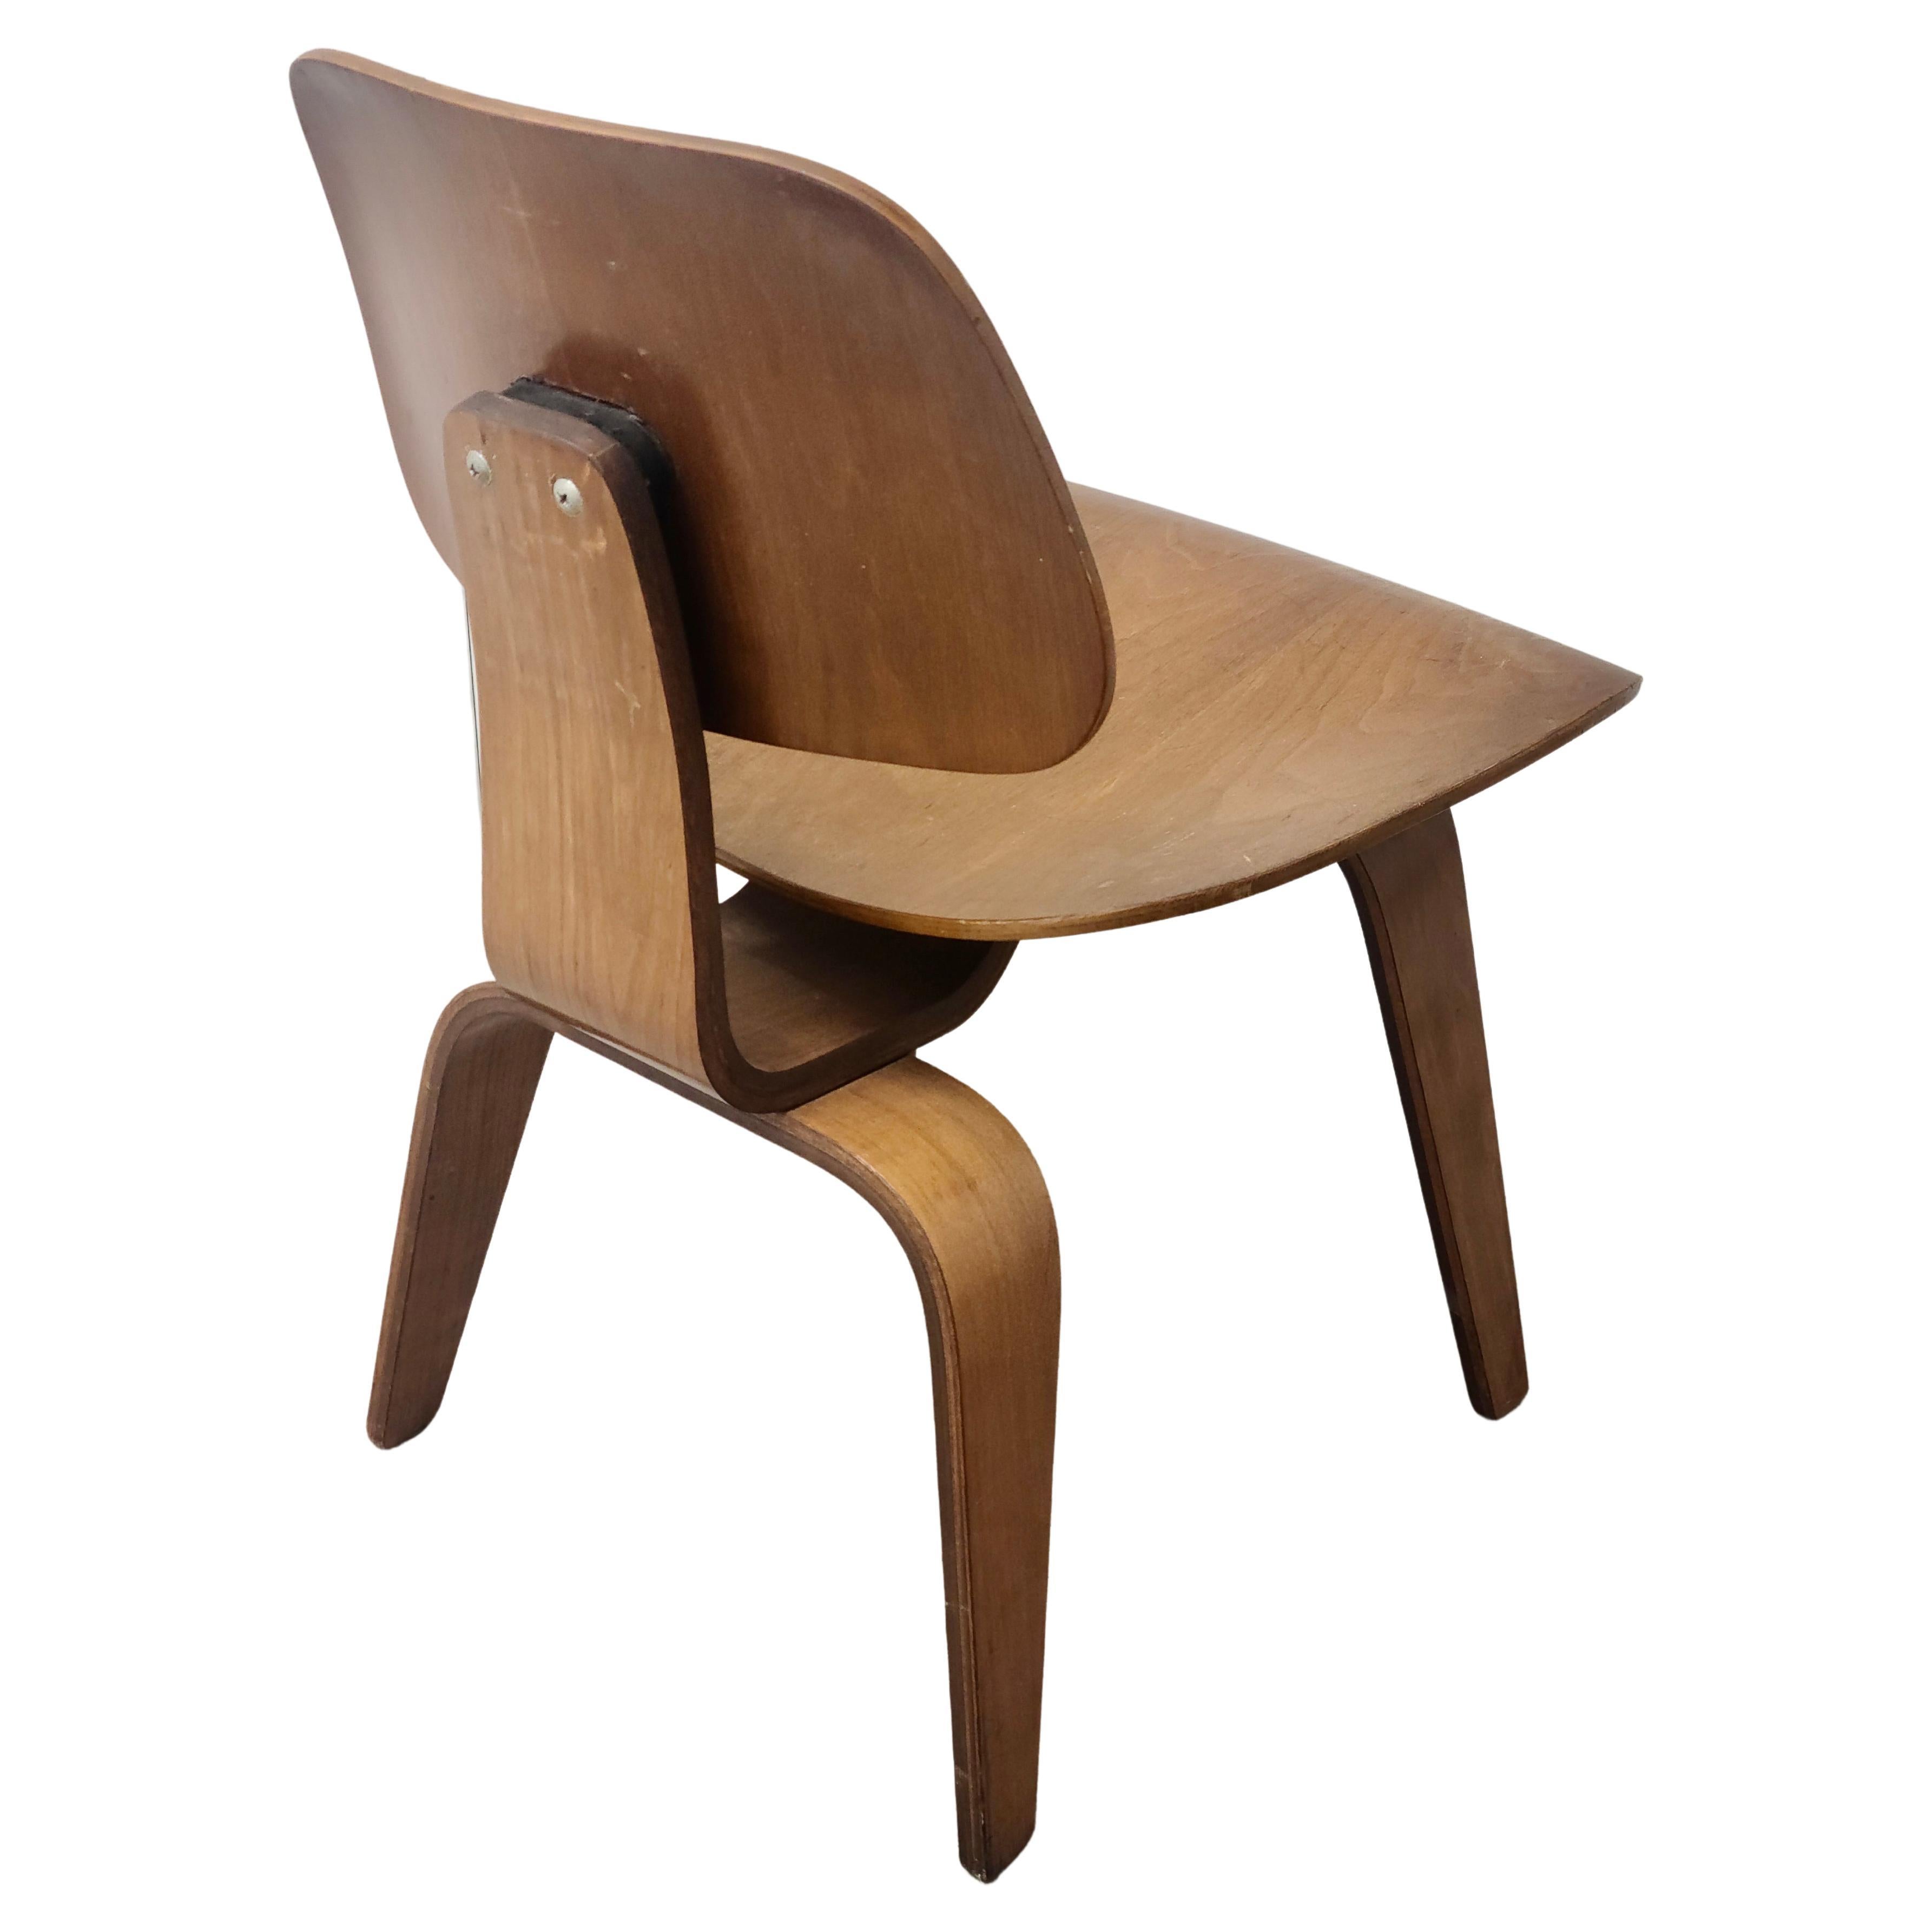 Please feel free to reach out for efficient shipping to your location.

Walnut Dining Chair Wood (DCW). Designed by Charles and Ray Eames
for the Molded Plywood Division of Evans Products. This chair manufactured
by Herman Miller. Note 5-2-4 screw